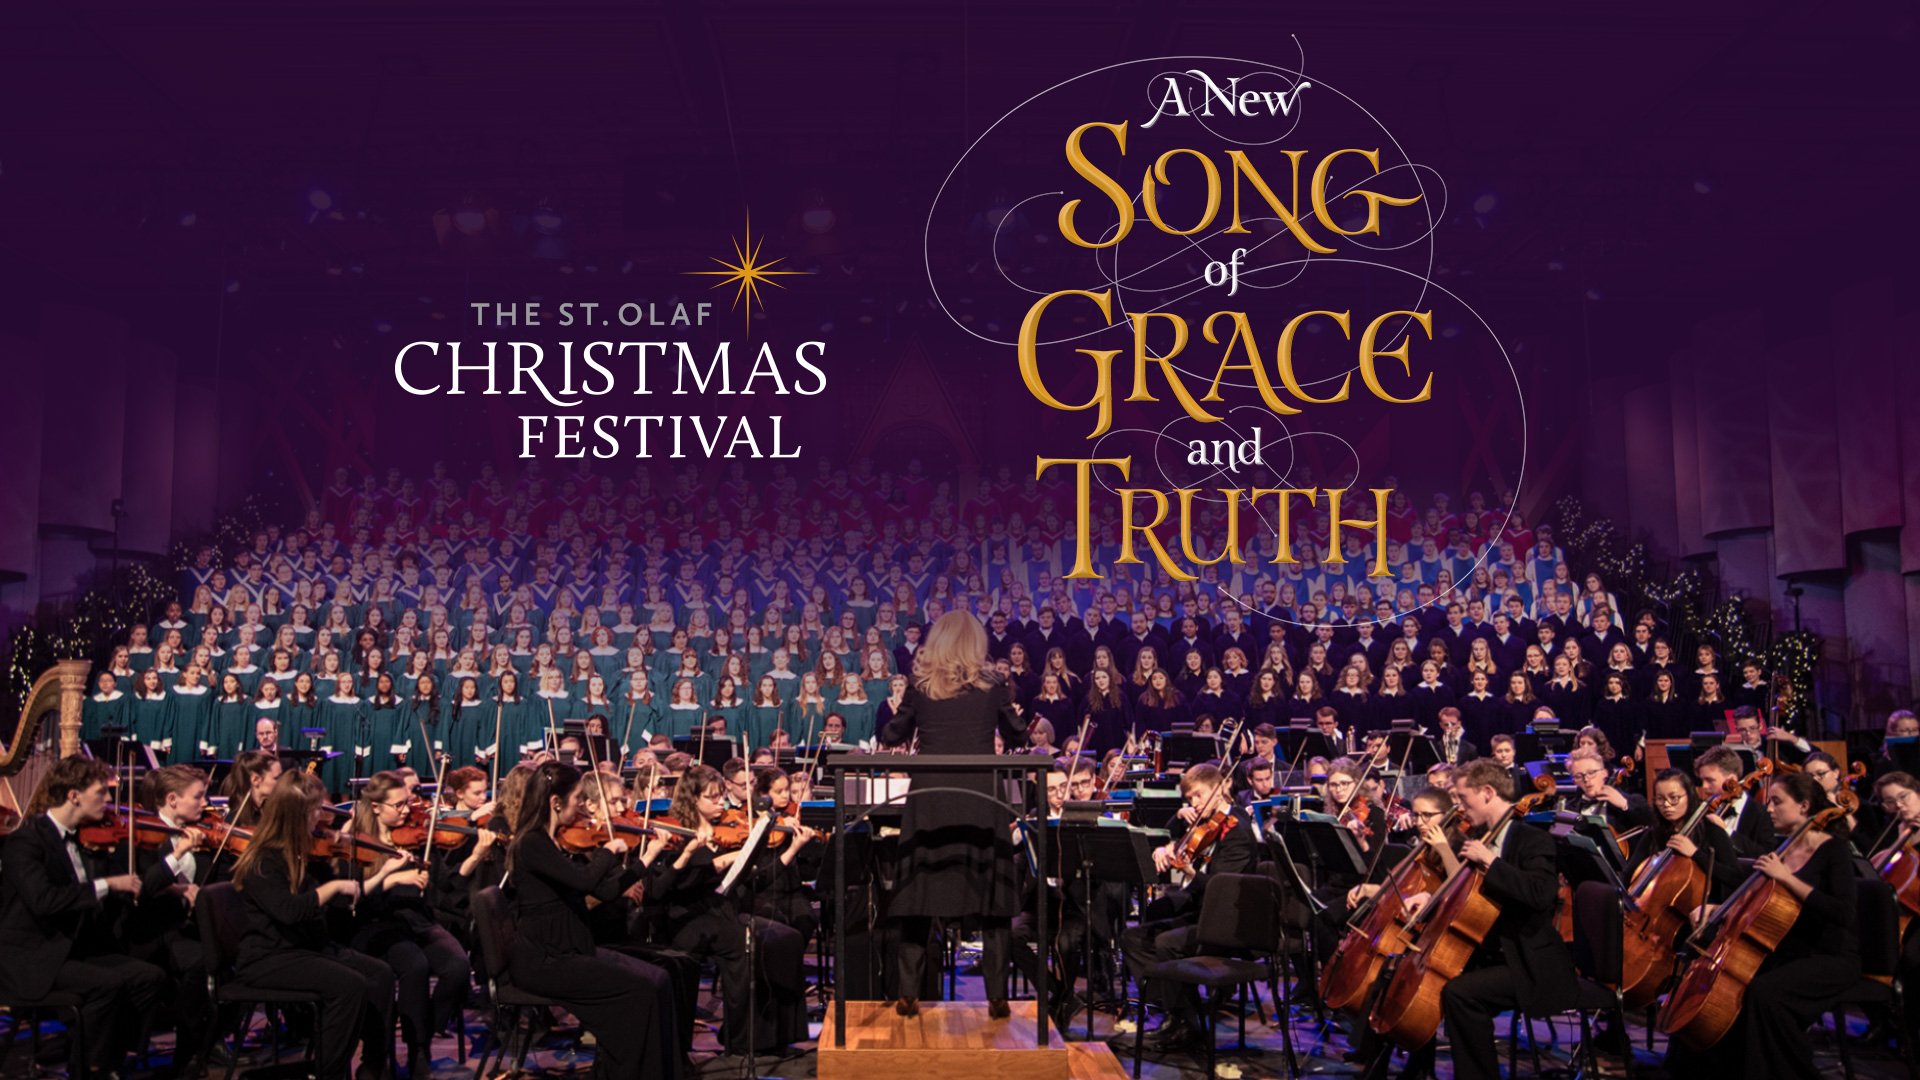 The St. Olaf Christmas Festival A New Song of Grace and Truth Twin